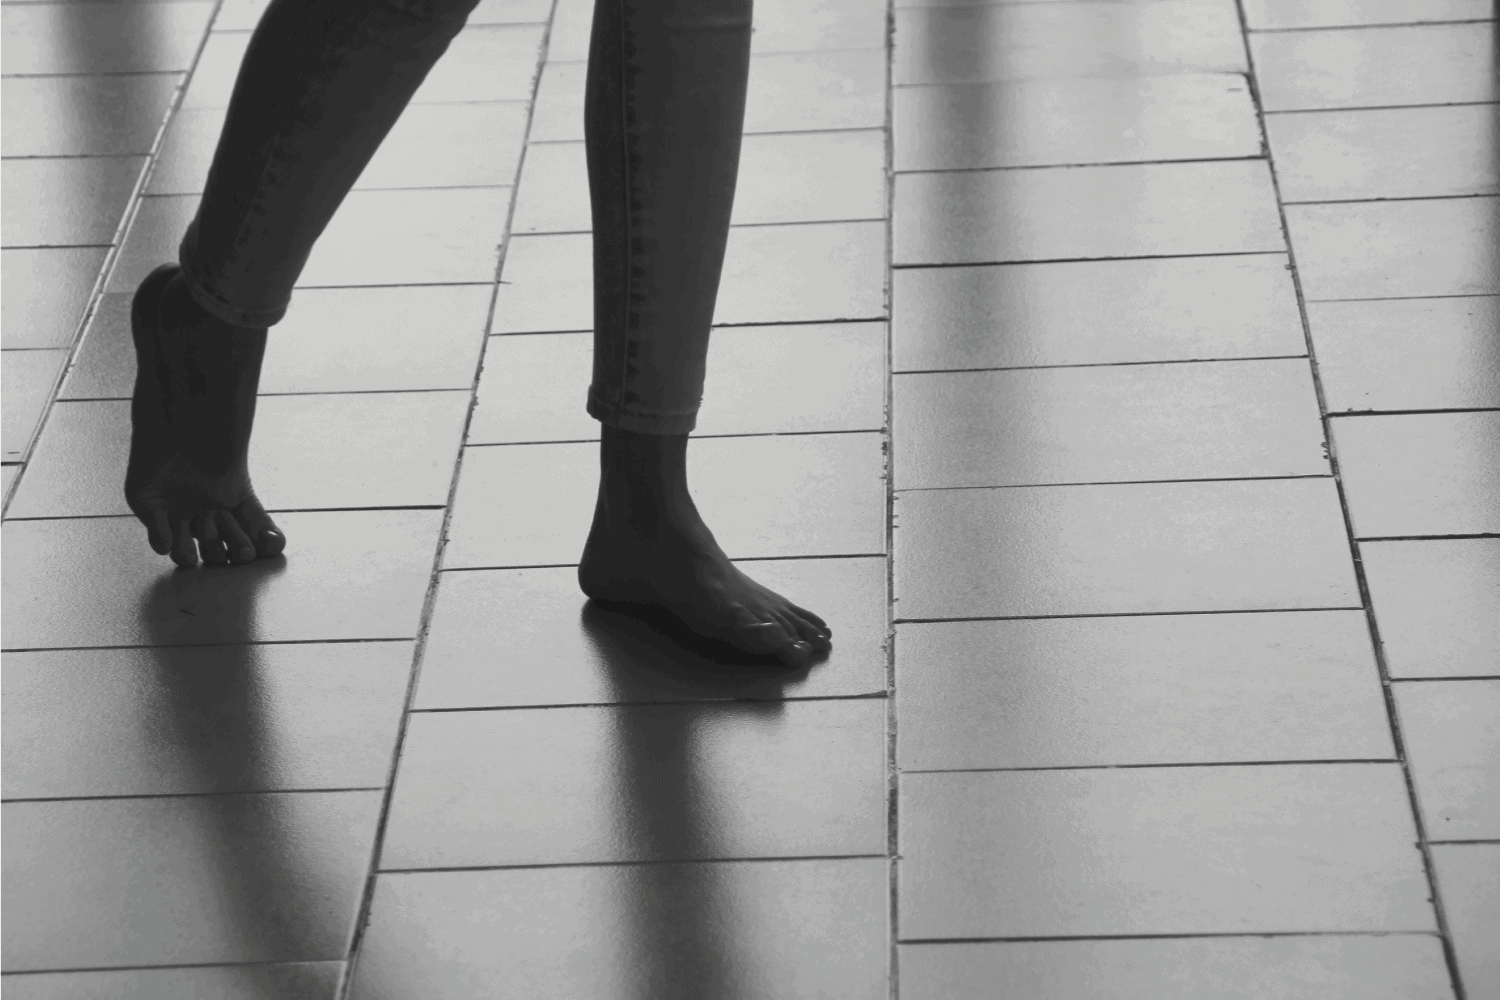 Abstract female feet go on tiled floor casting a shadows. The girl is walking barefoot on tile surface